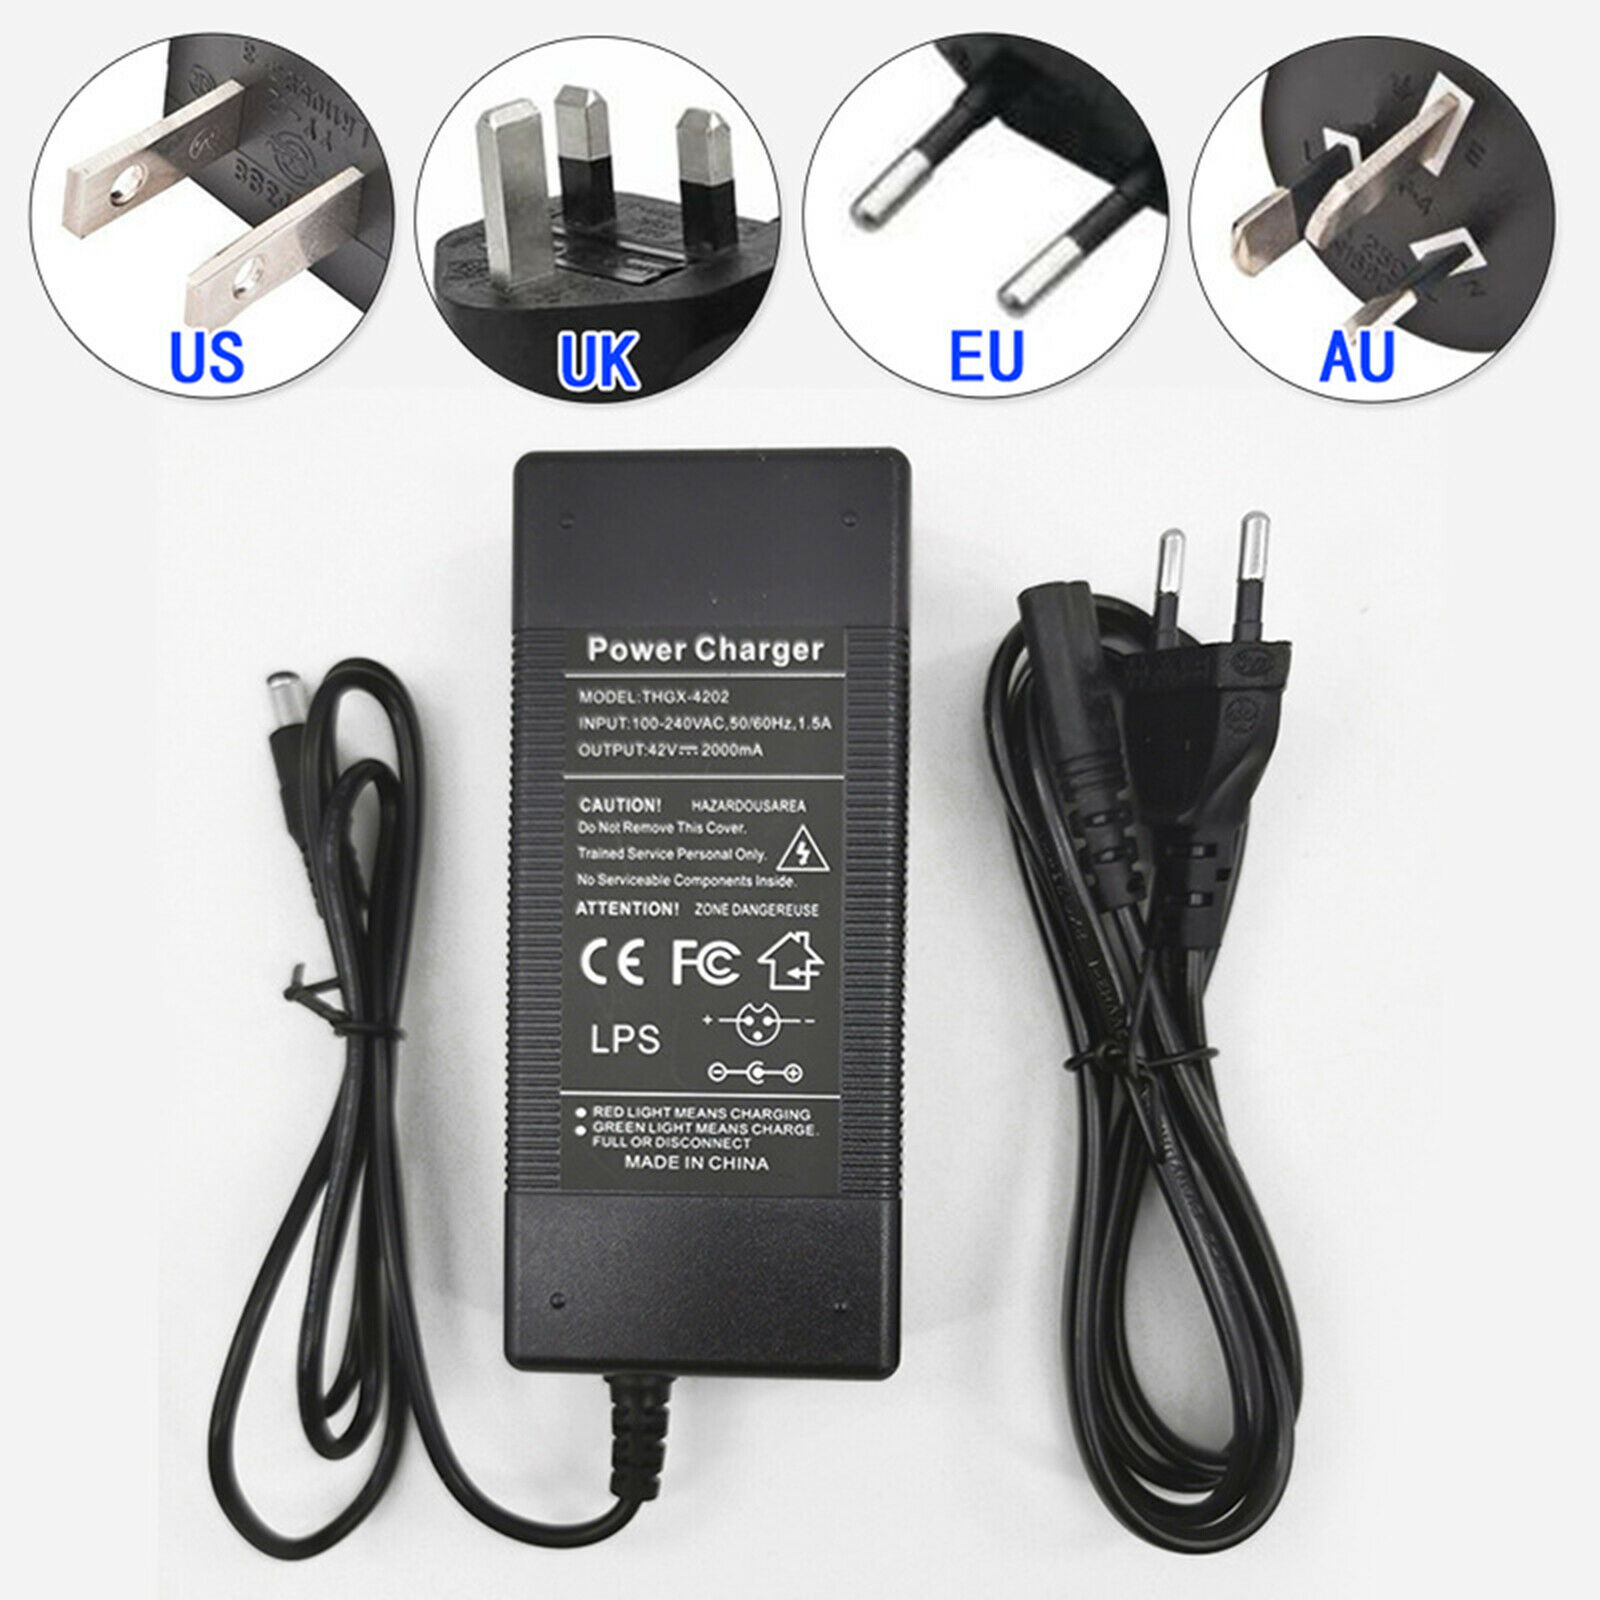 Scooter Charger ac adapter Power Supply Charging Plug for 8 inch Electric Scooter VER Mi Ninebot Scooter KUGOO Balance - Click Image to Close